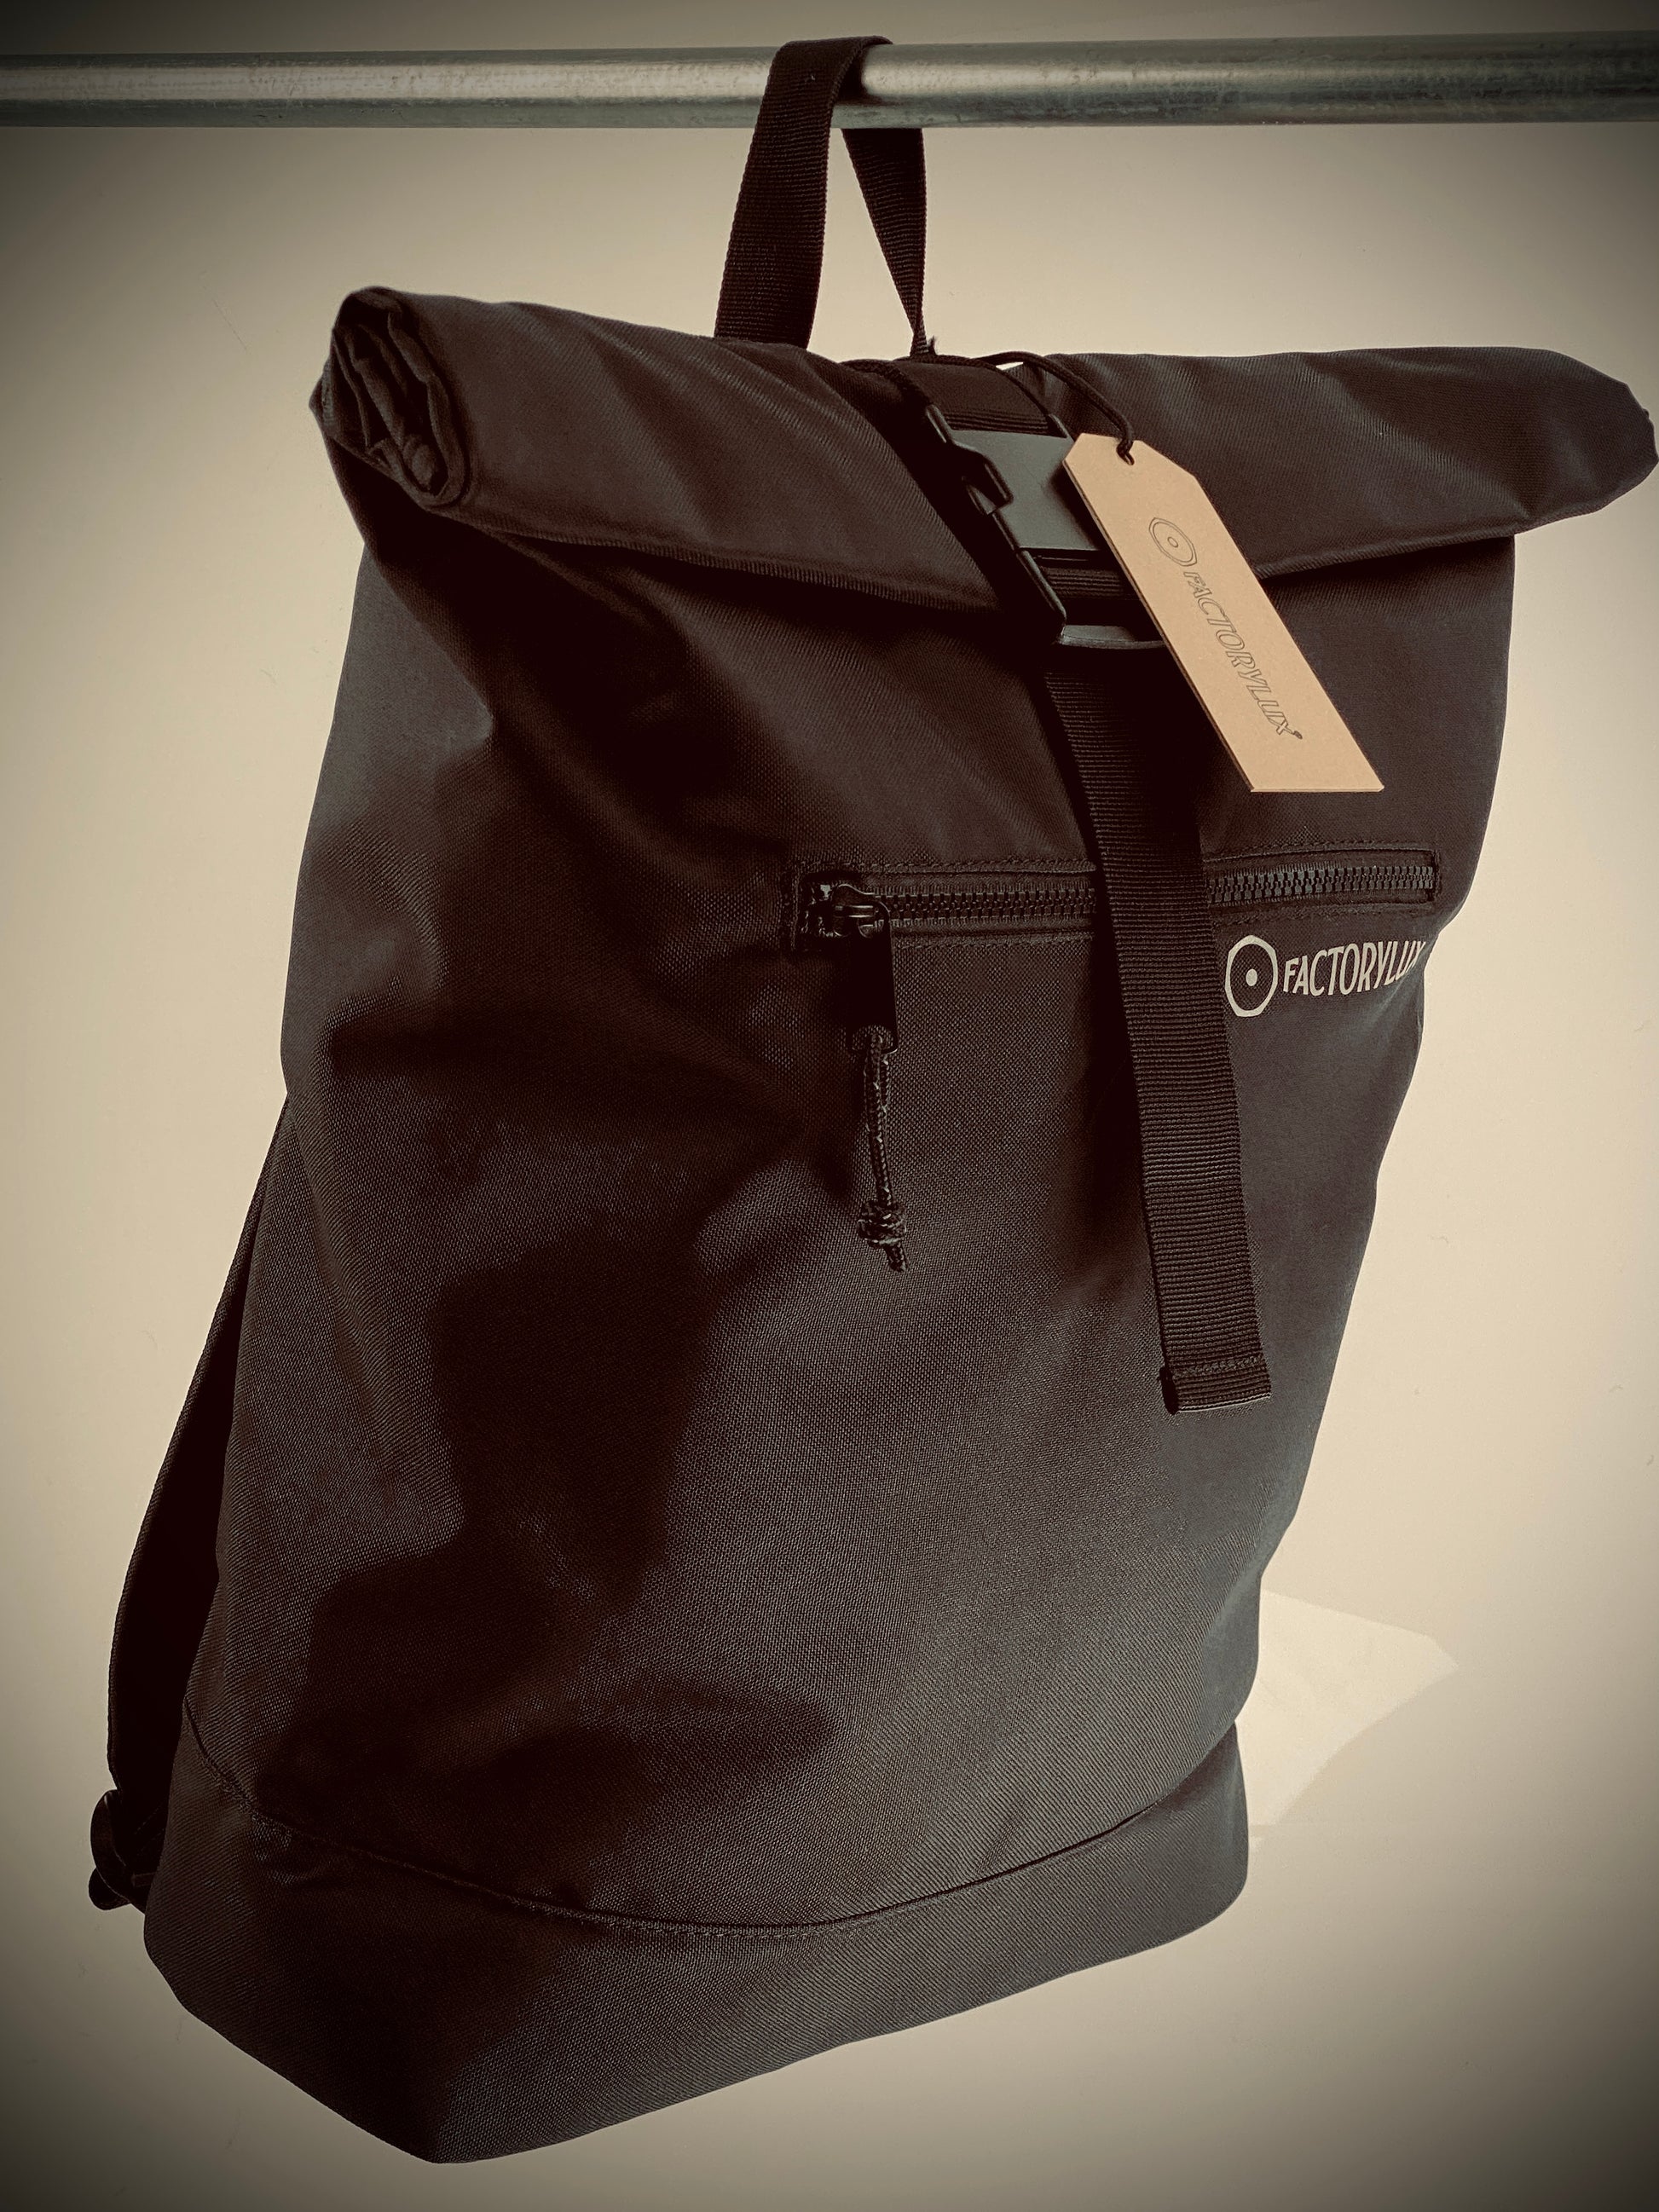 Factorylux 20 litre, roll top, black recycled polyester bag with Factorylux logo.